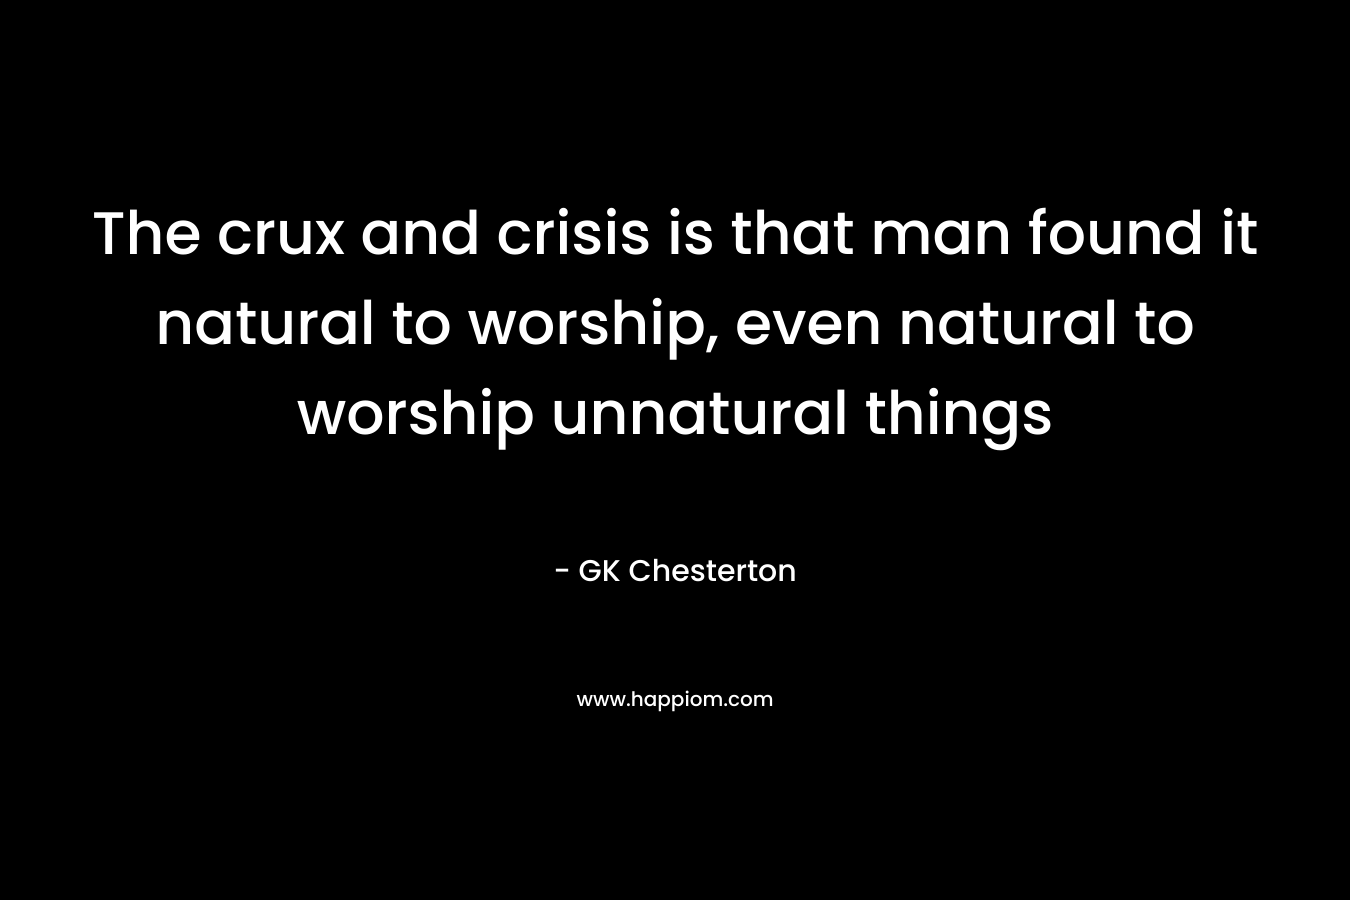 The crux and crisis is that man found it natural to worship, even natural to worship unnatural things – GK Chesterton